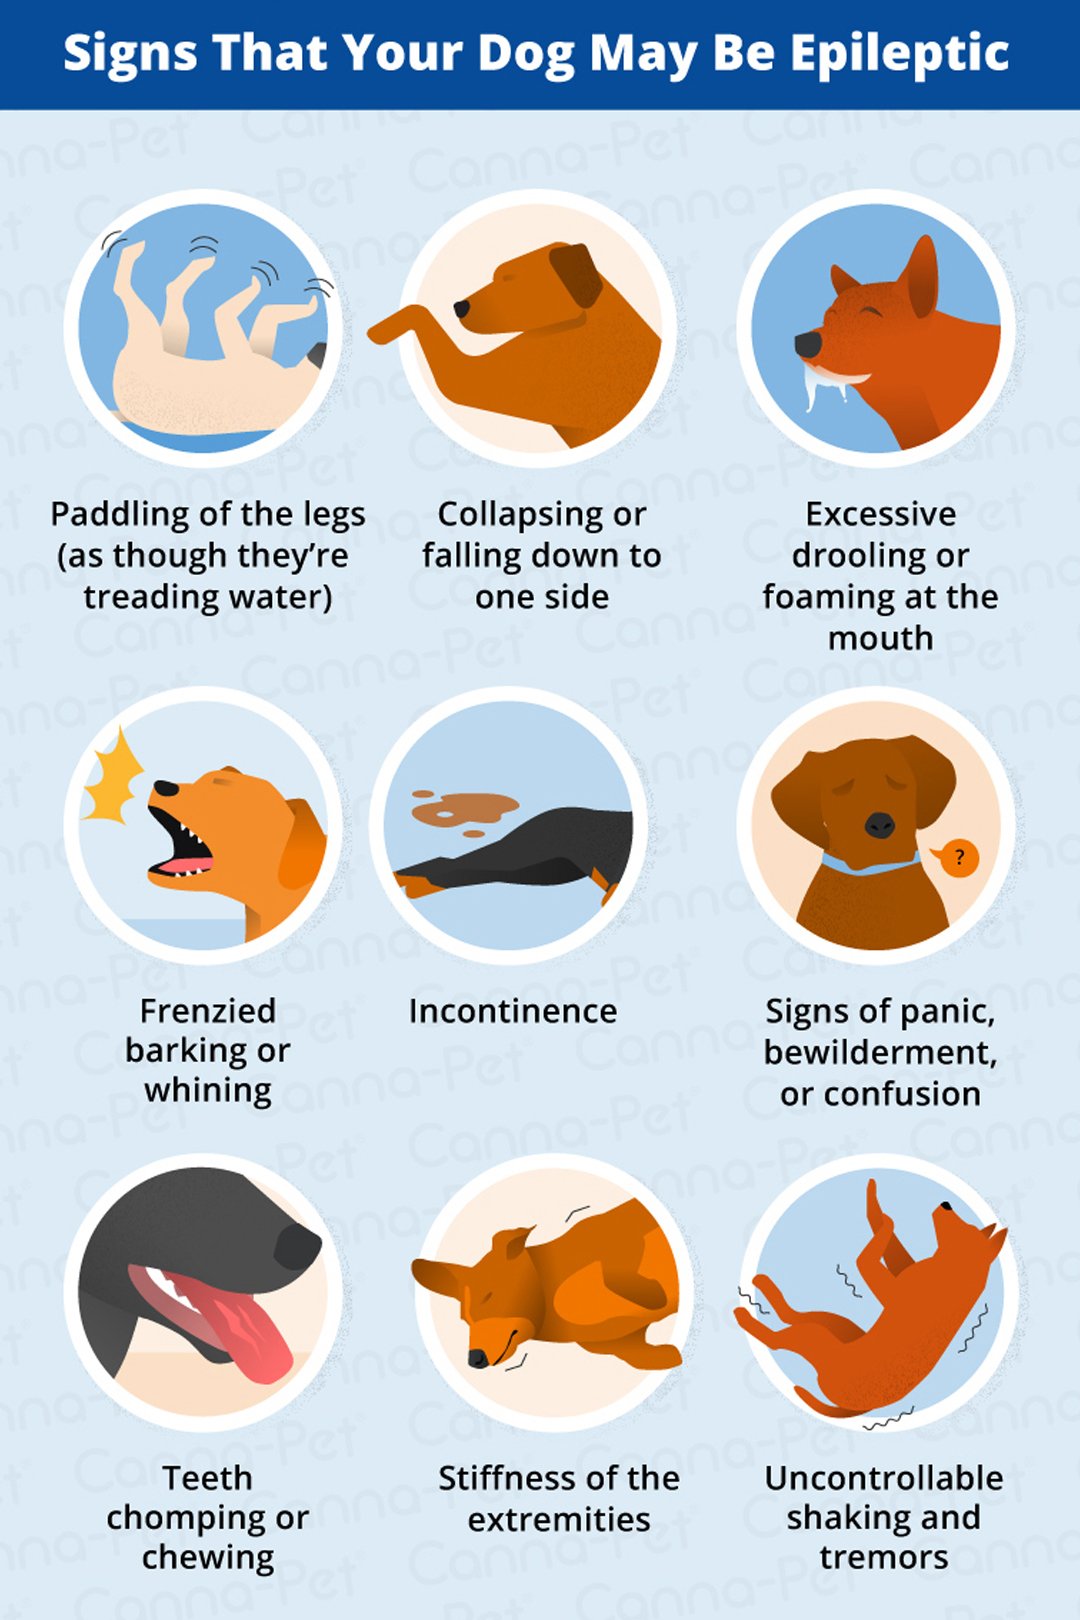 Signs that your dog may be Epileptic